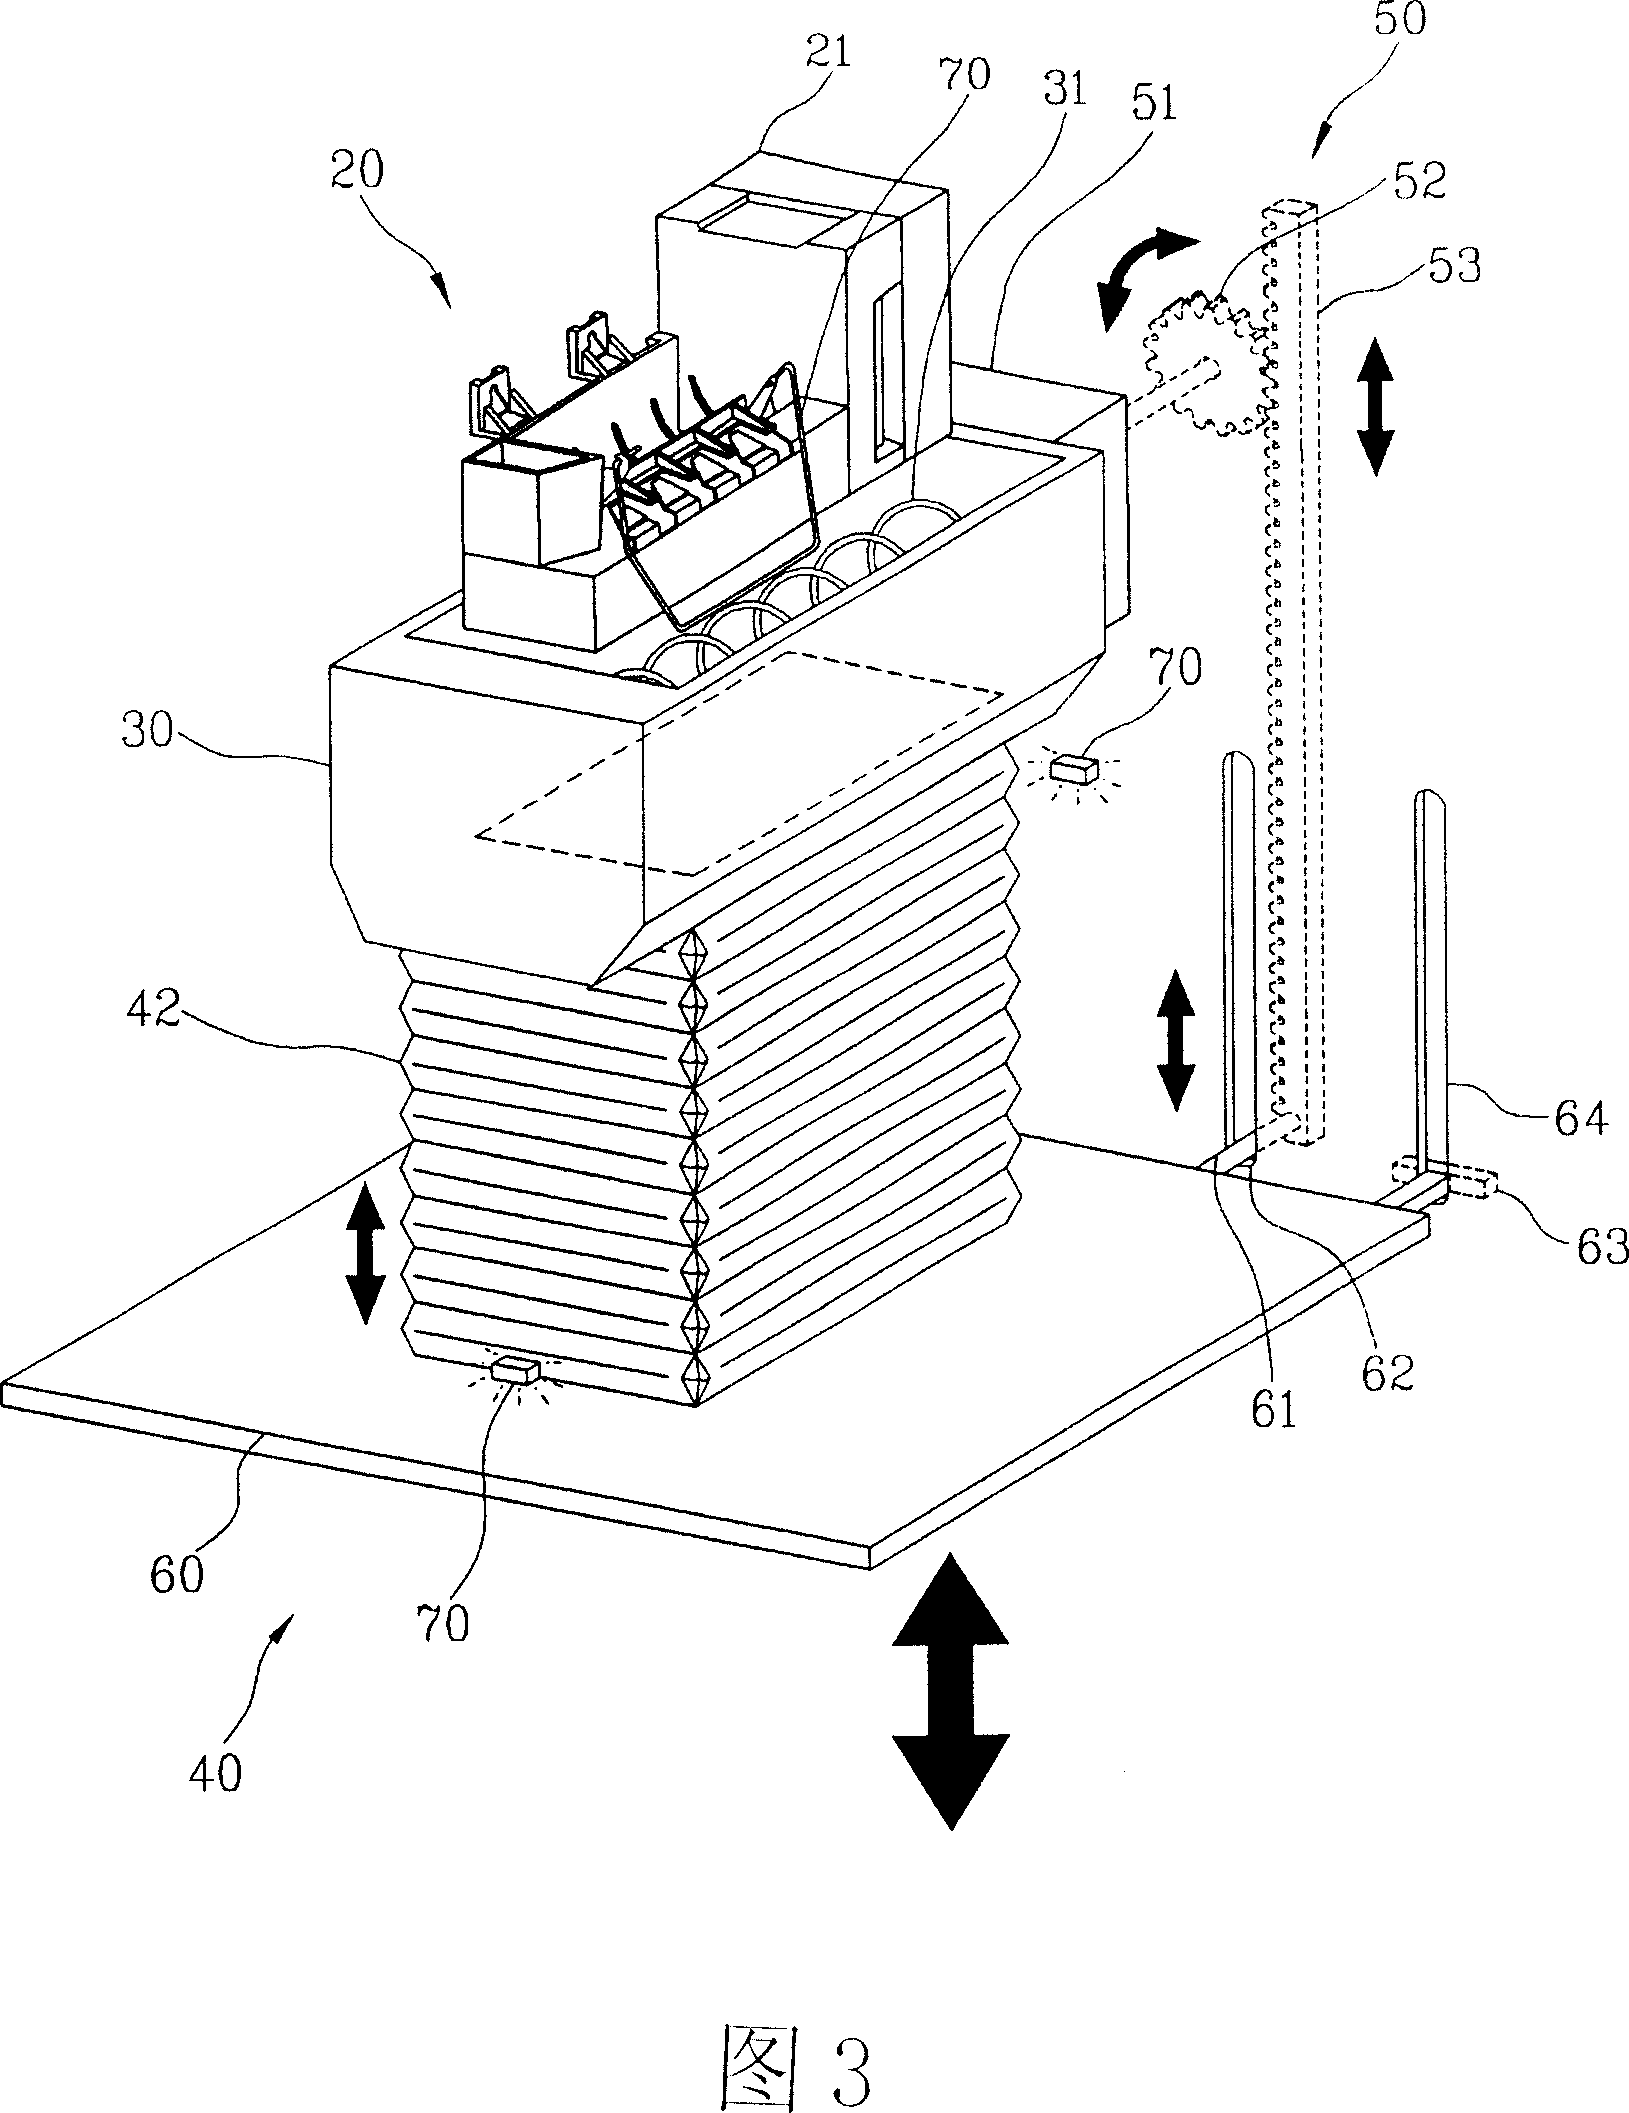 Expansion device for ice making device in refrigerator